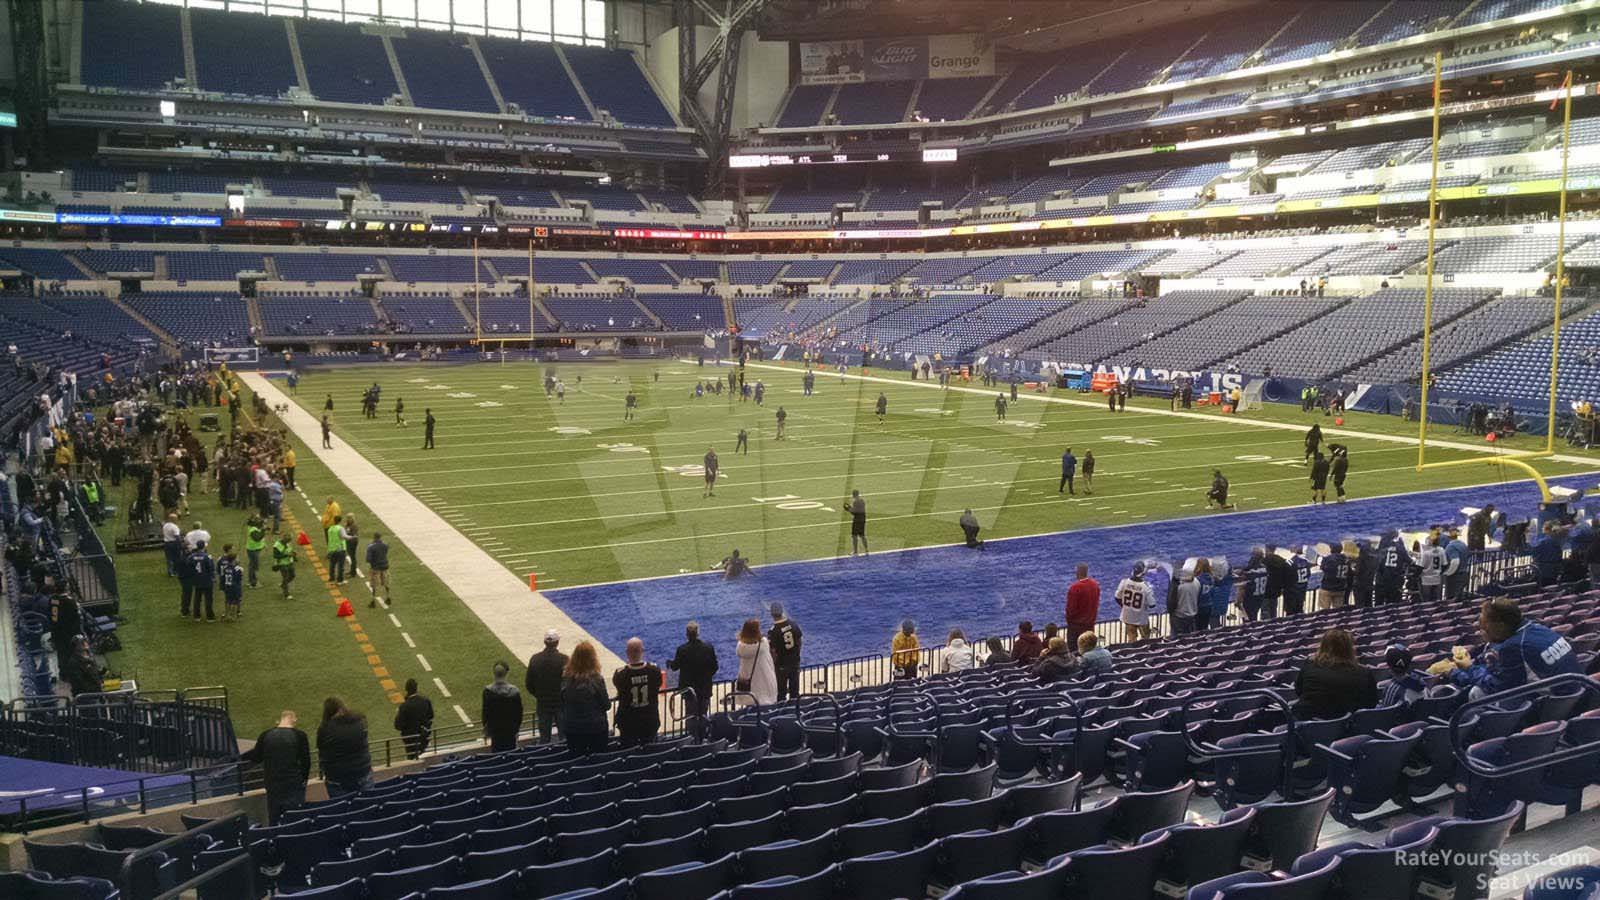 section 103, row 20 seat view  for football - lucas oil stadium